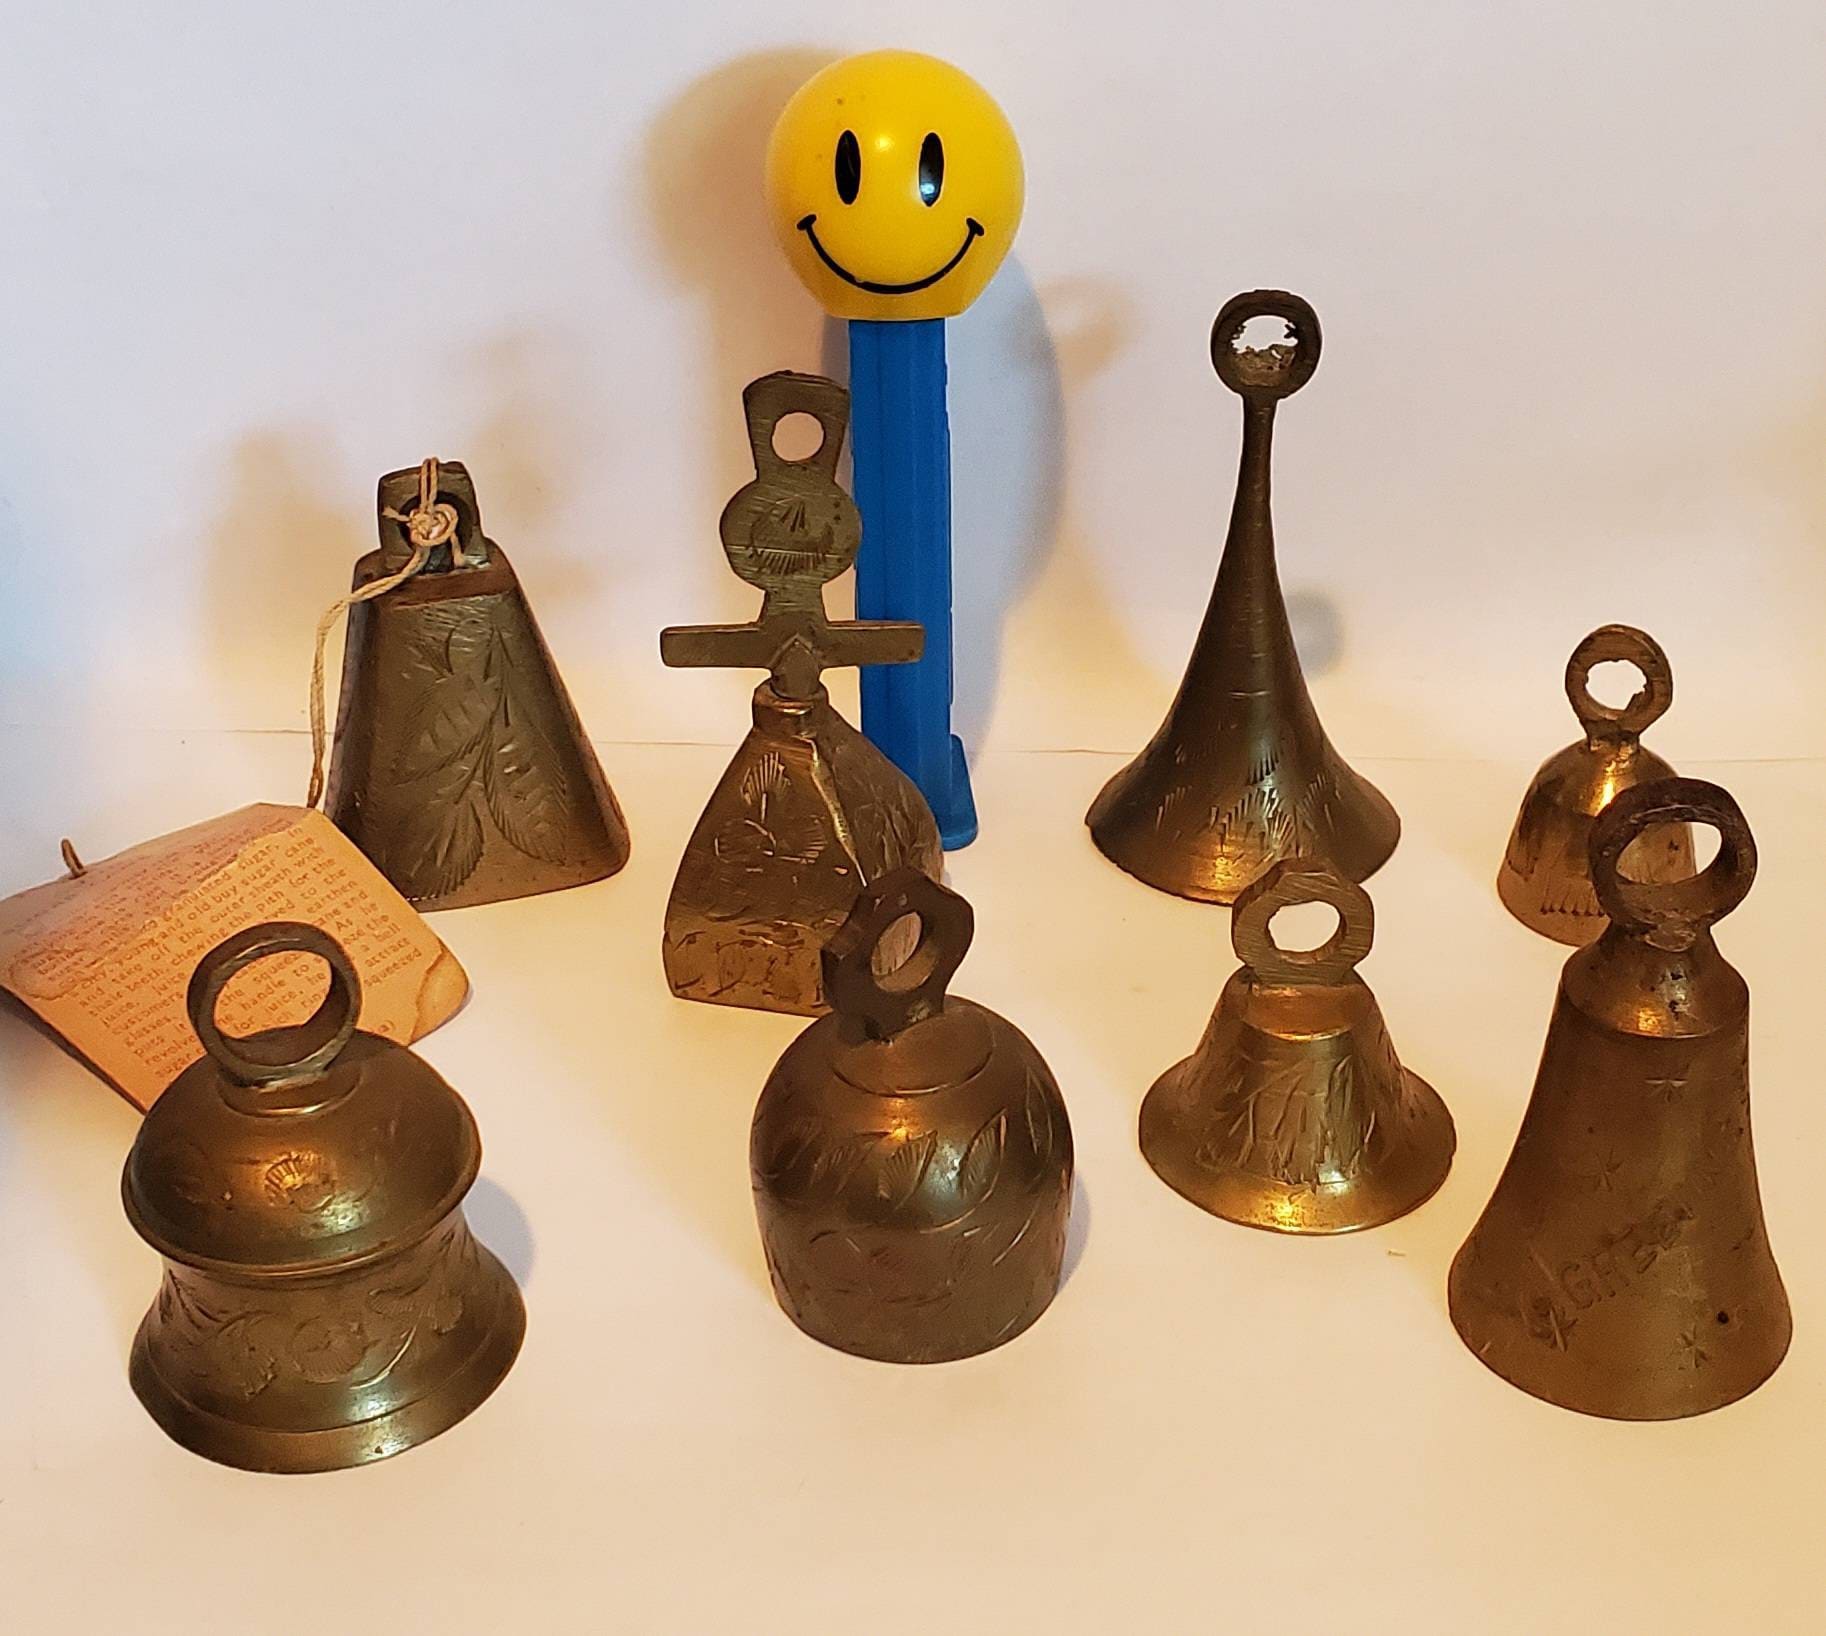 Vintage Brass Bells From India Your Choice: Small Bells, Mini Brass Bells,  Doll House Shadowbox India Brass 